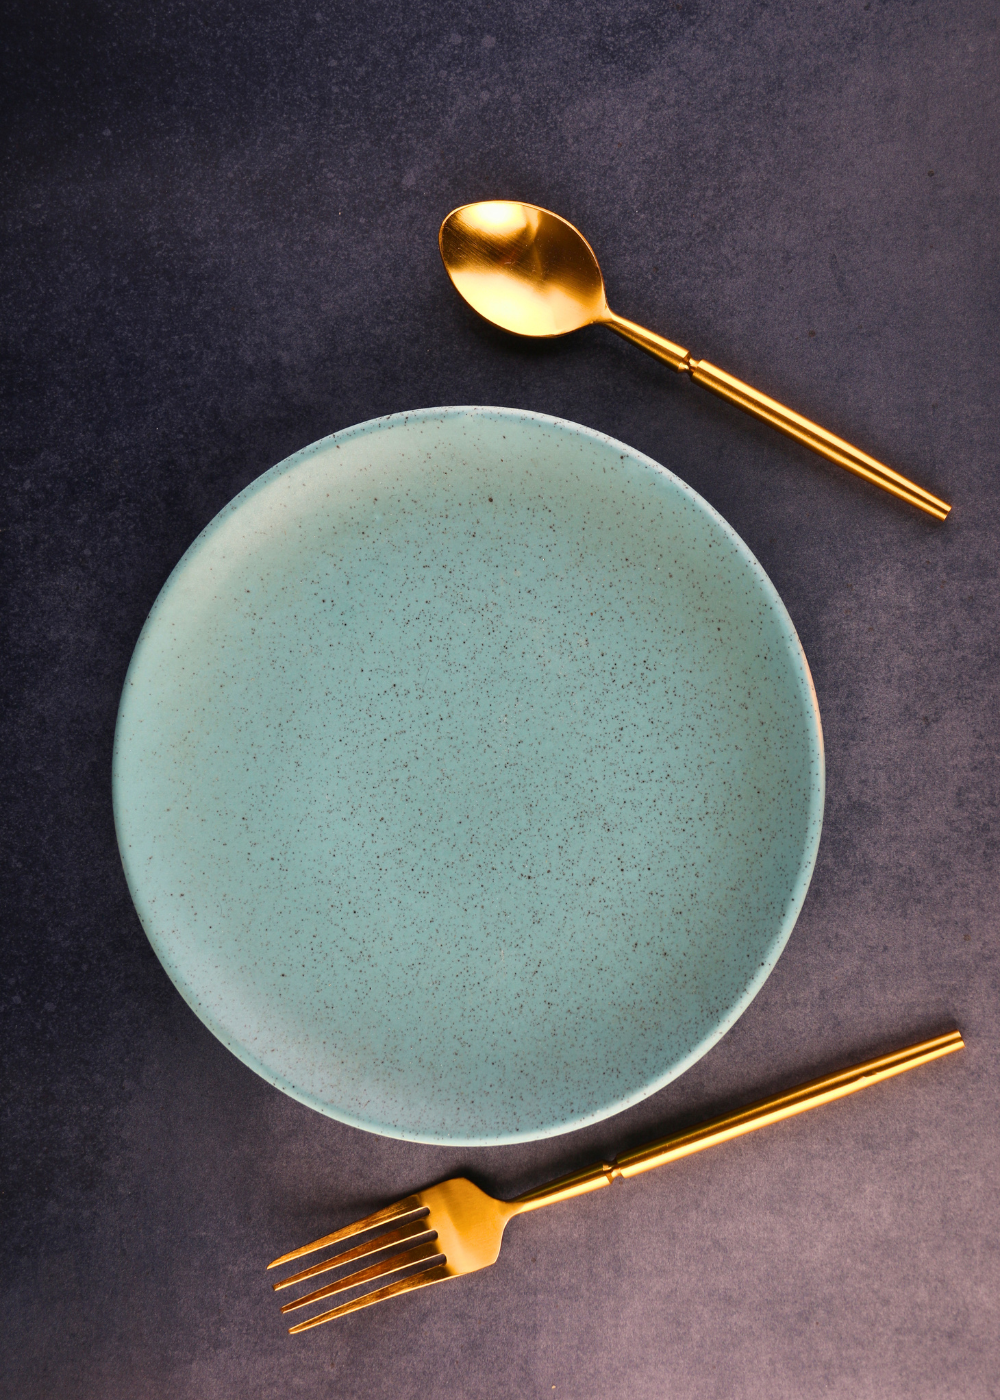 Handmade Teal Quarter Plate With Spoon & Fork